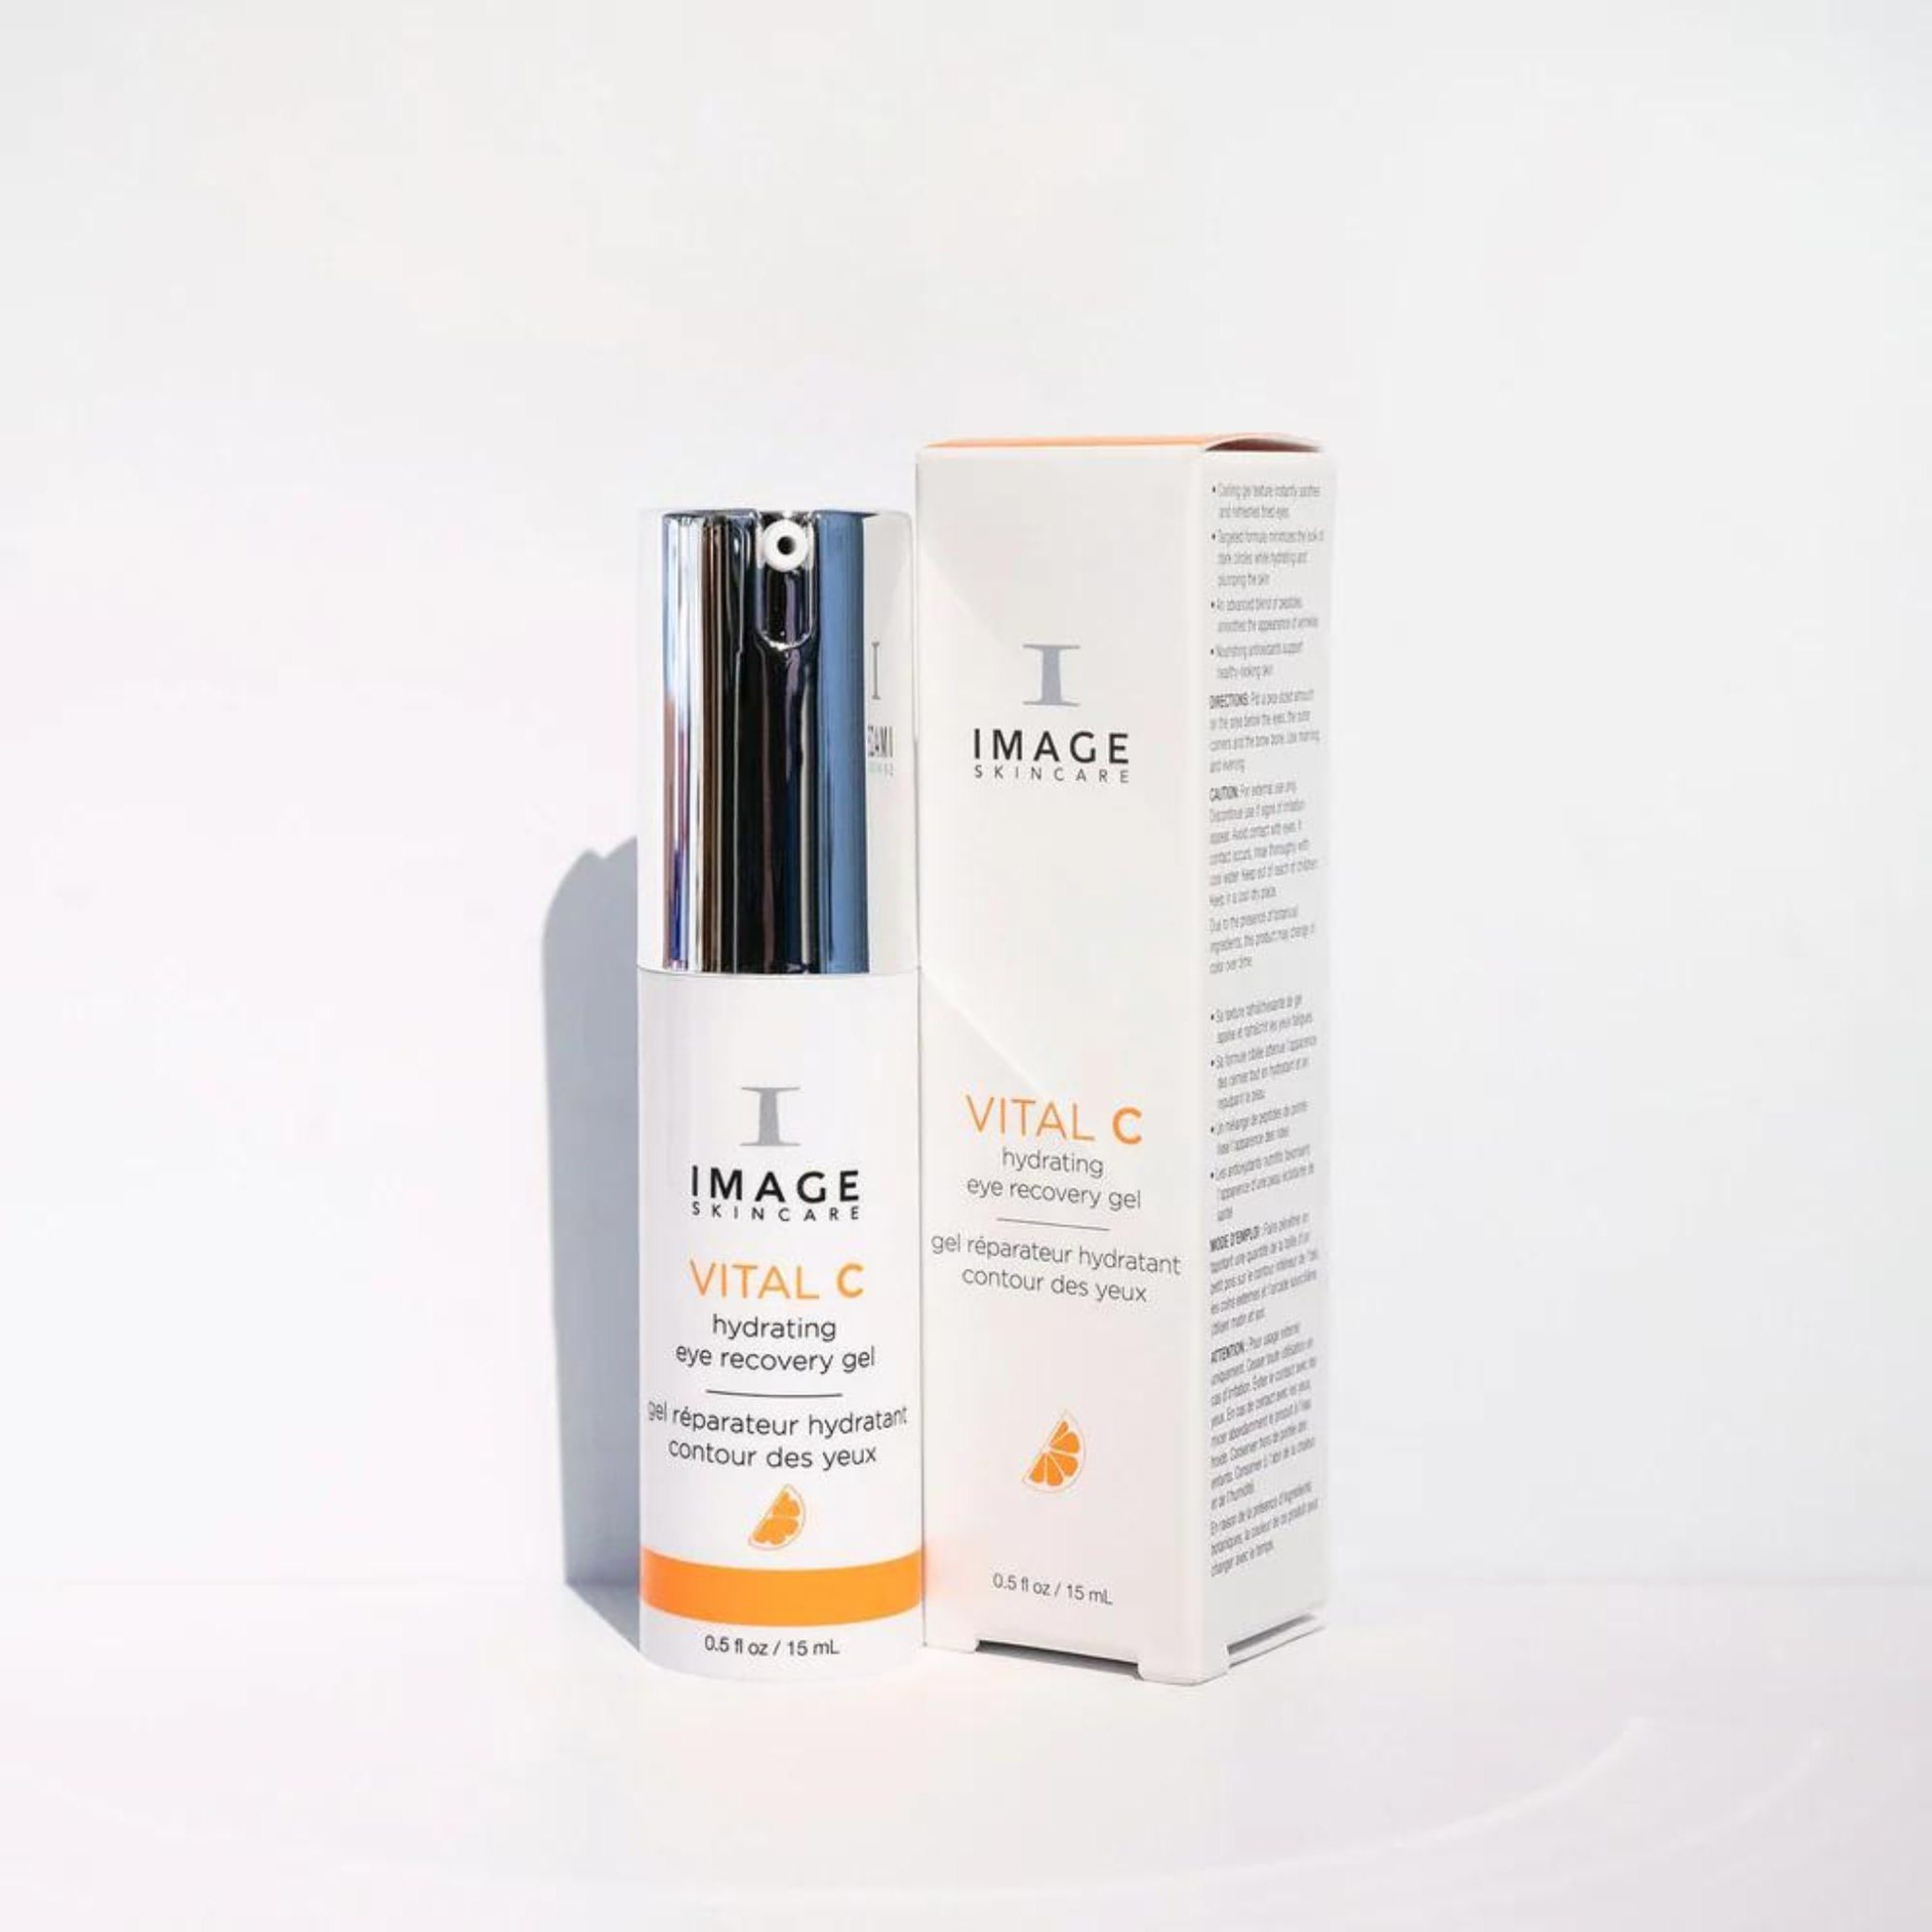 This hydrating and refreshing eye gel helps to reduce the appearance of dark circles, puffiness, fine lines and wrinkles.